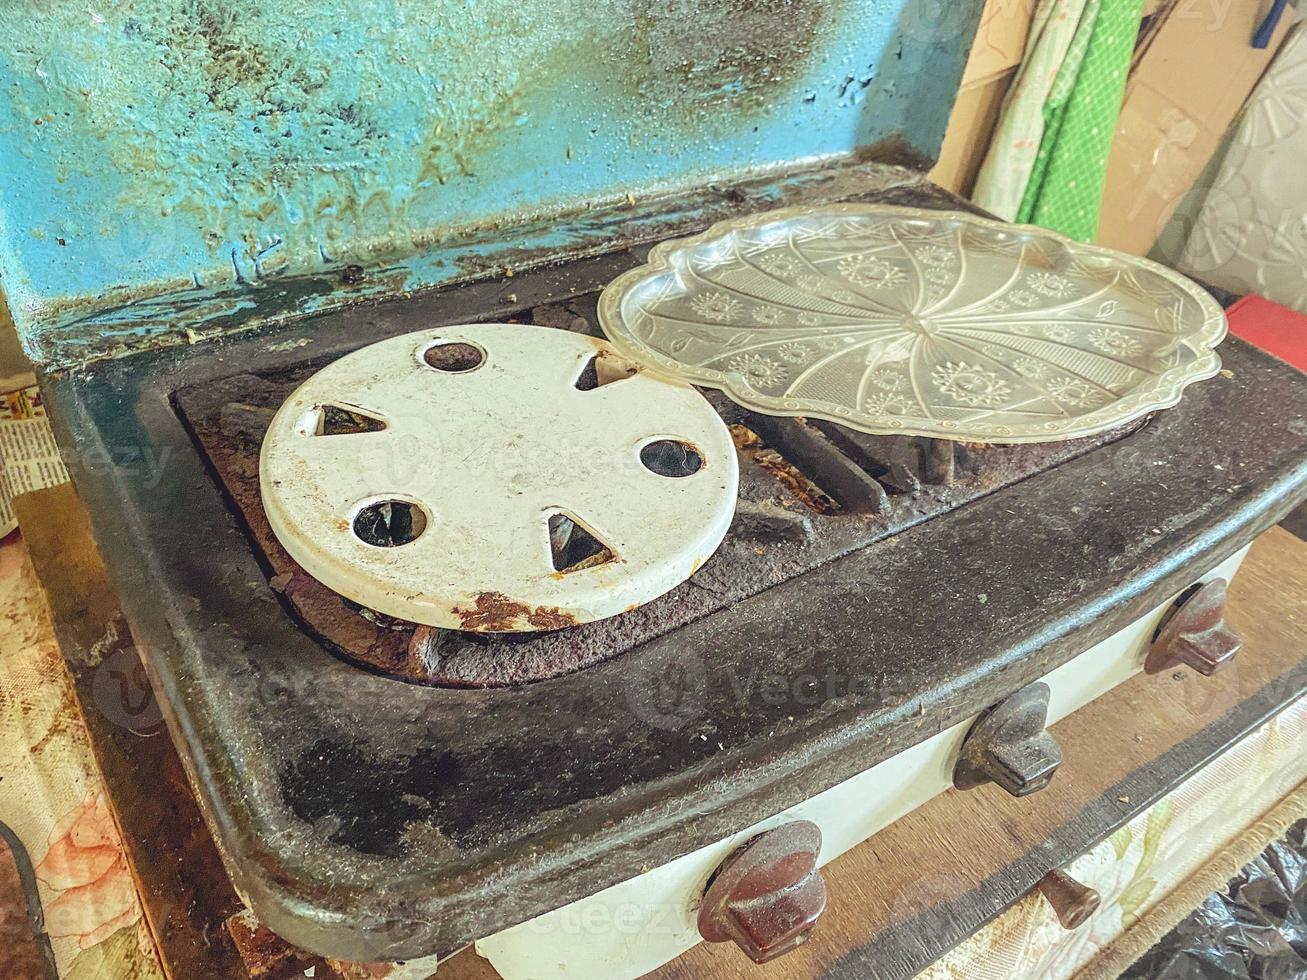 old gas stove for cooking. burners for gas, pans. two places for cooking. garden appliances for the kitchen. small stove photo